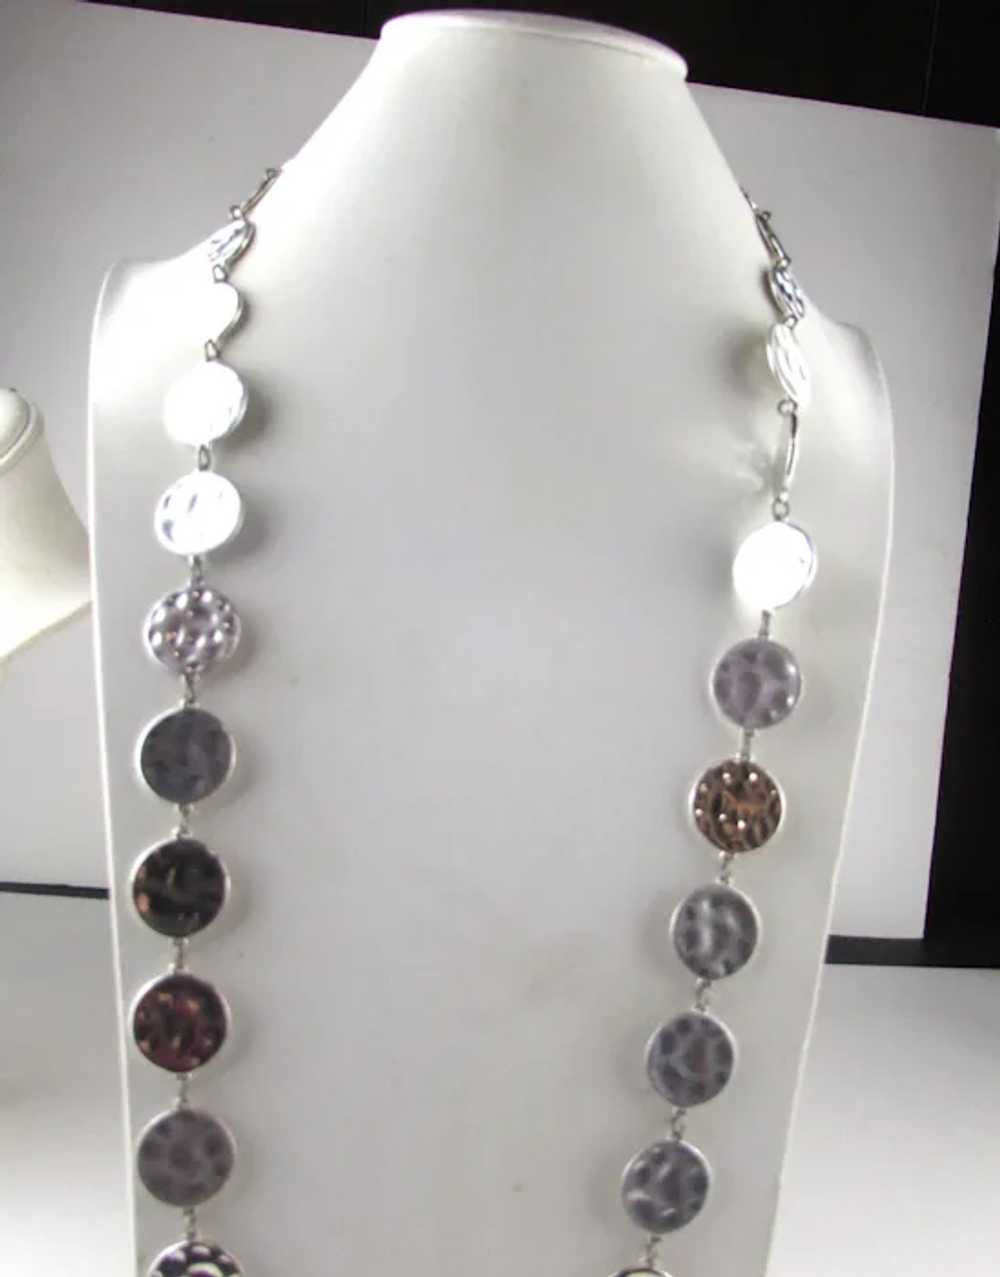 Chico Silver Tone Chain with  Textured Discs - image 6